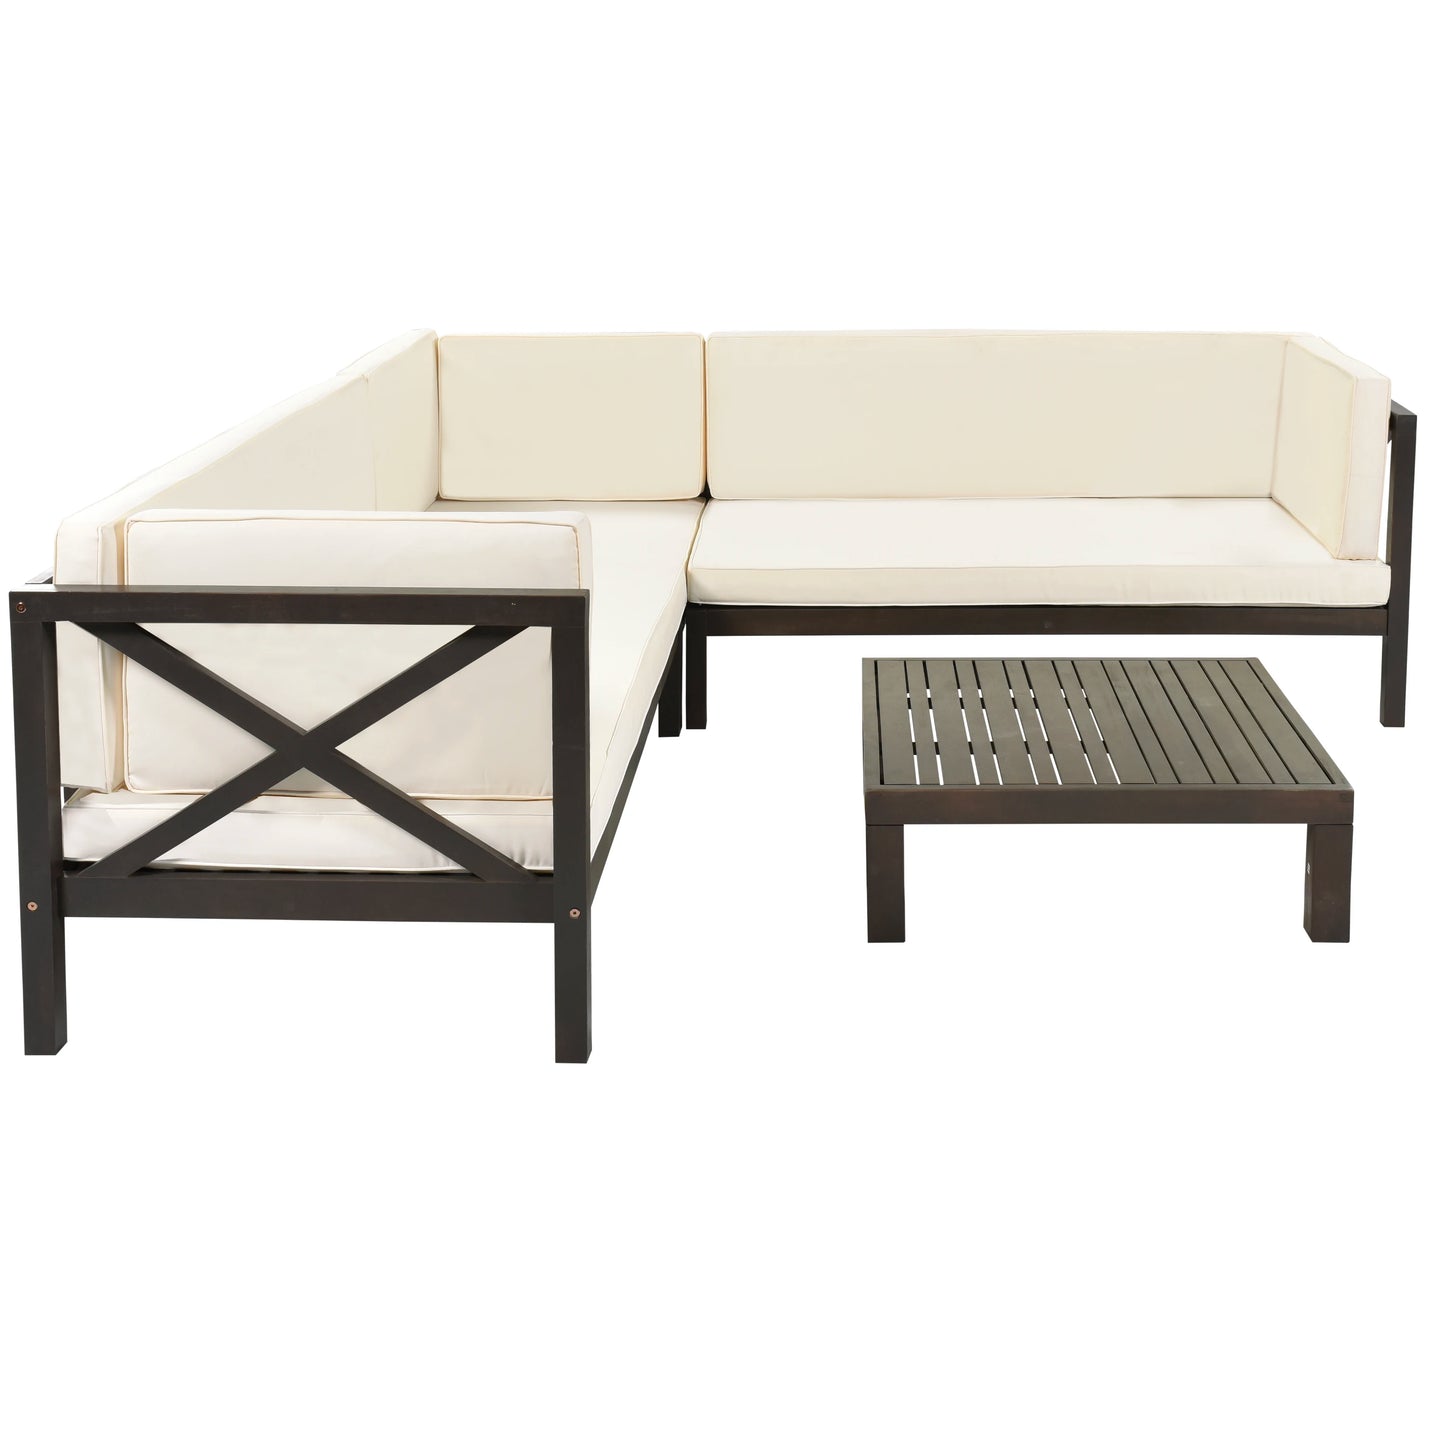 Outdoor furniture Set Wood Patio Backyard 4-Pc Sectional with Cushions and Table